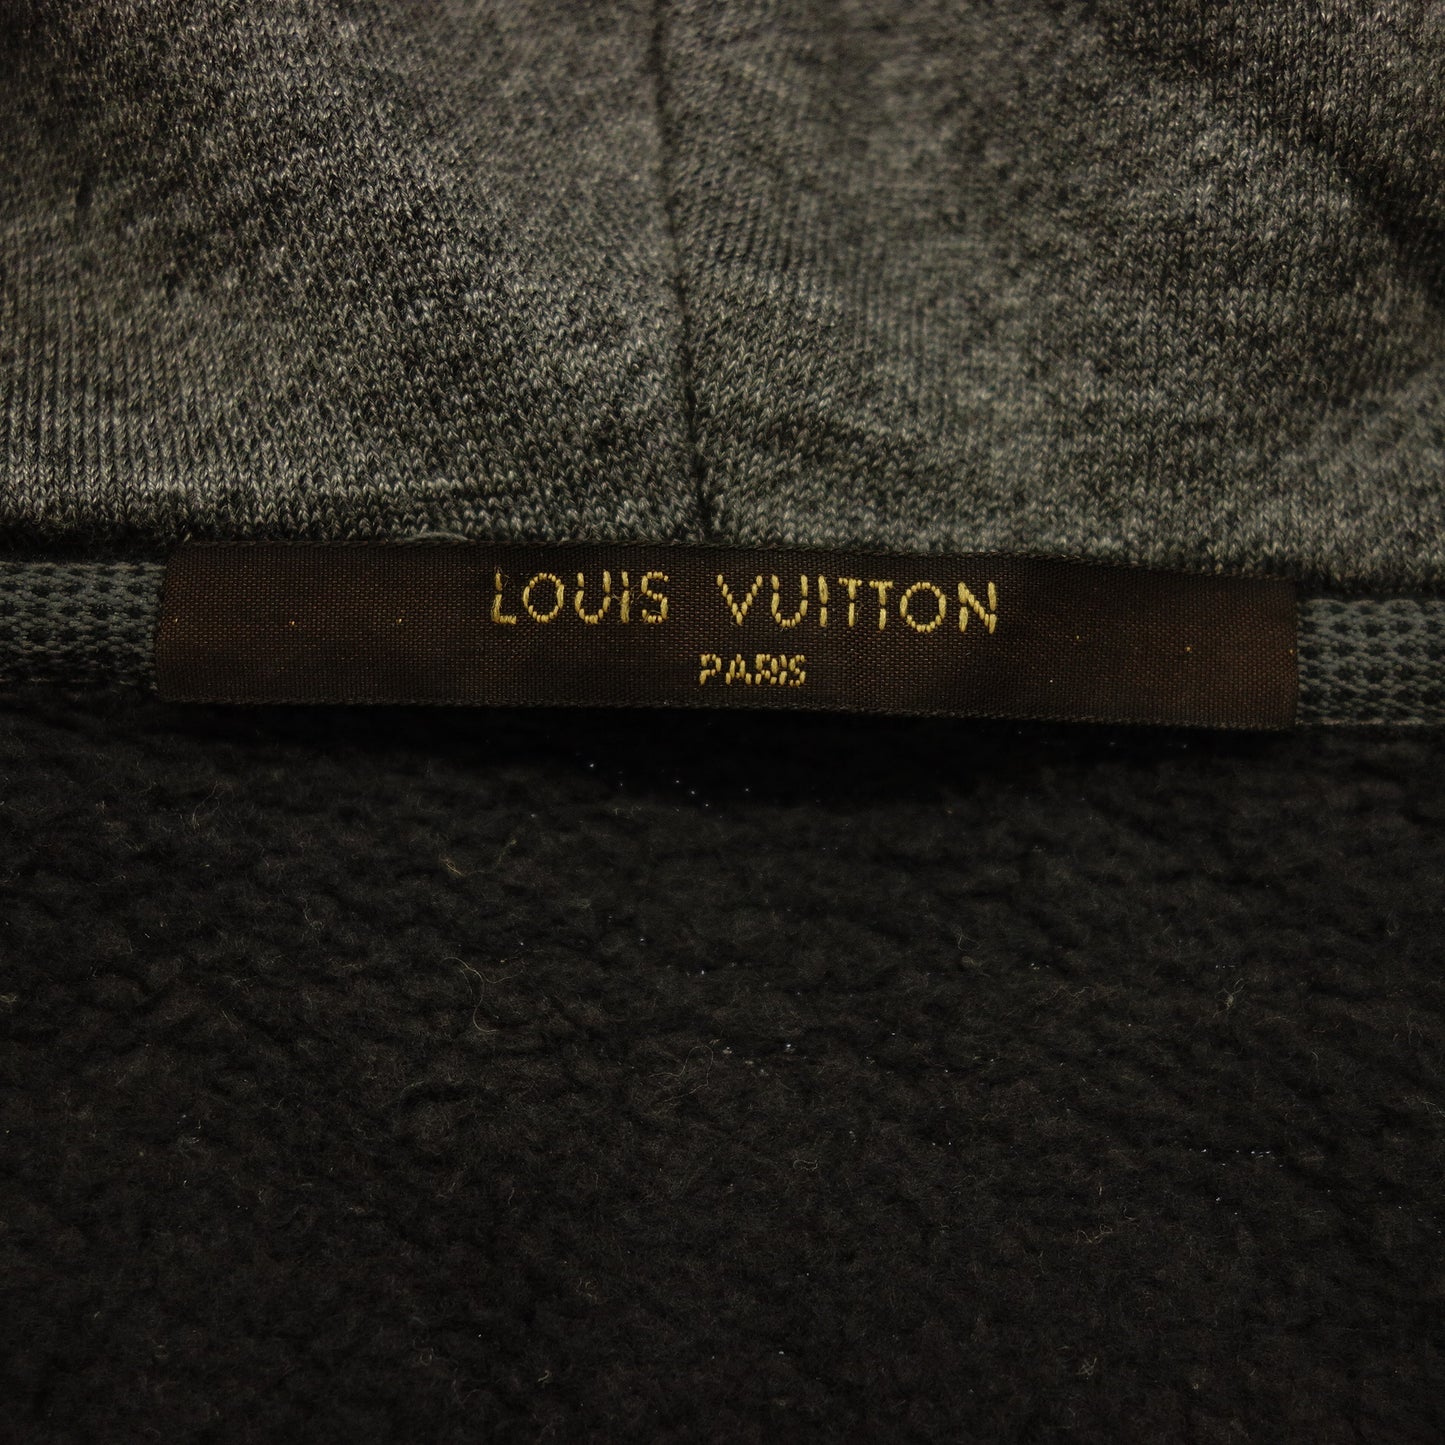 Used ◆Louis Vuitton Zip Up Parka Silver Metal Fittings LV Leather Patch Gray Size M Men's LOUIS VUITTON [AFB19] 